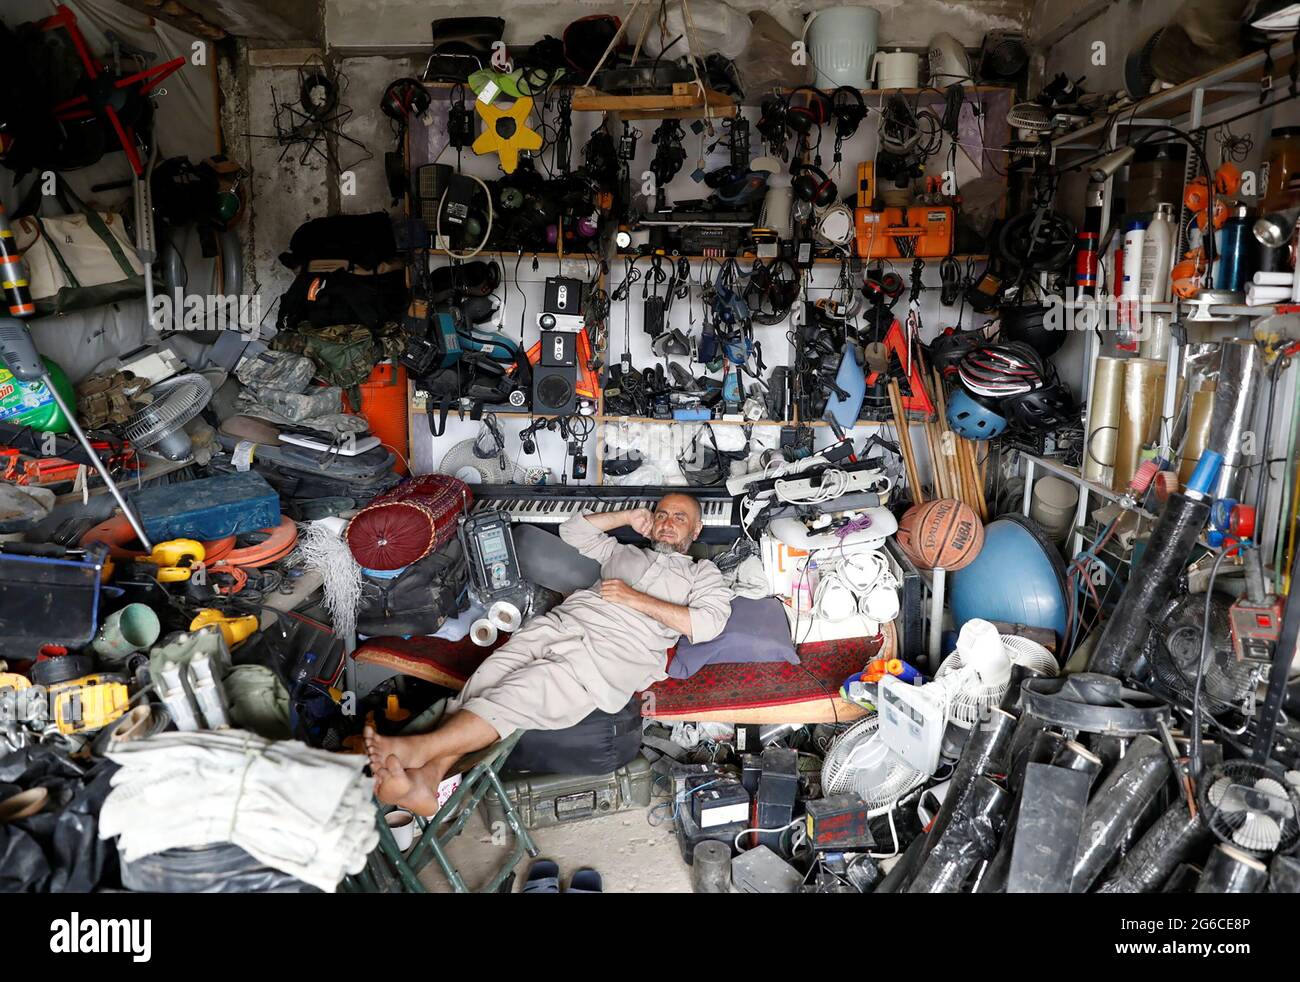 An Afghan man rests in his shop as he sell U.S. second hand materials  outside Bagram U.S. air base, after American troops vacated it, in Parwan  province, Afghanistan July 5, 2021. REUTERS/Mohammad